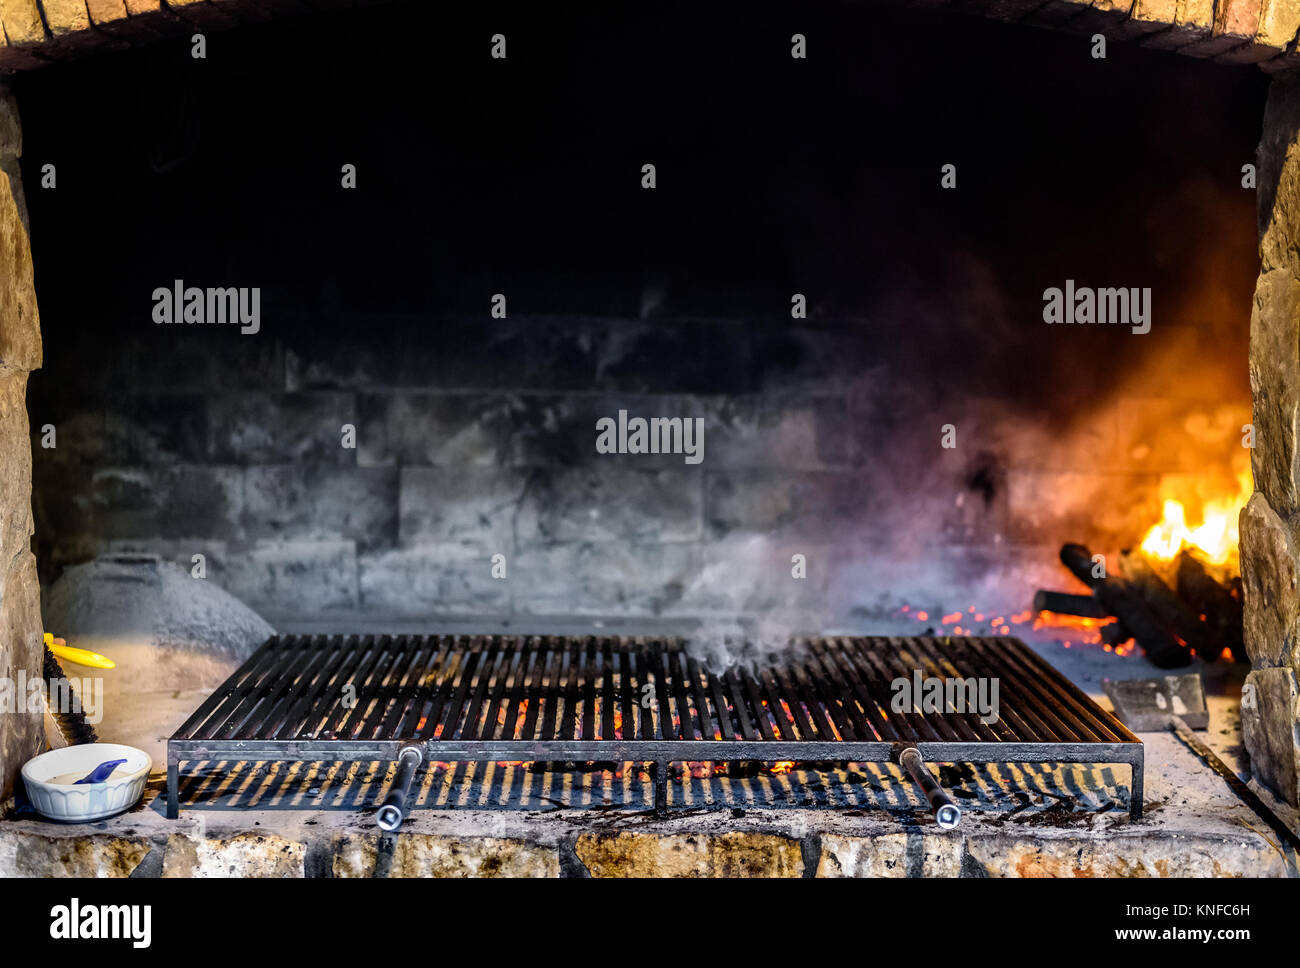 Professional big stone paved barbecue fireplace grill in a restaurant. Grilling on charcoal or coal with big grill grates or grids, and burning wood i Stock Photo